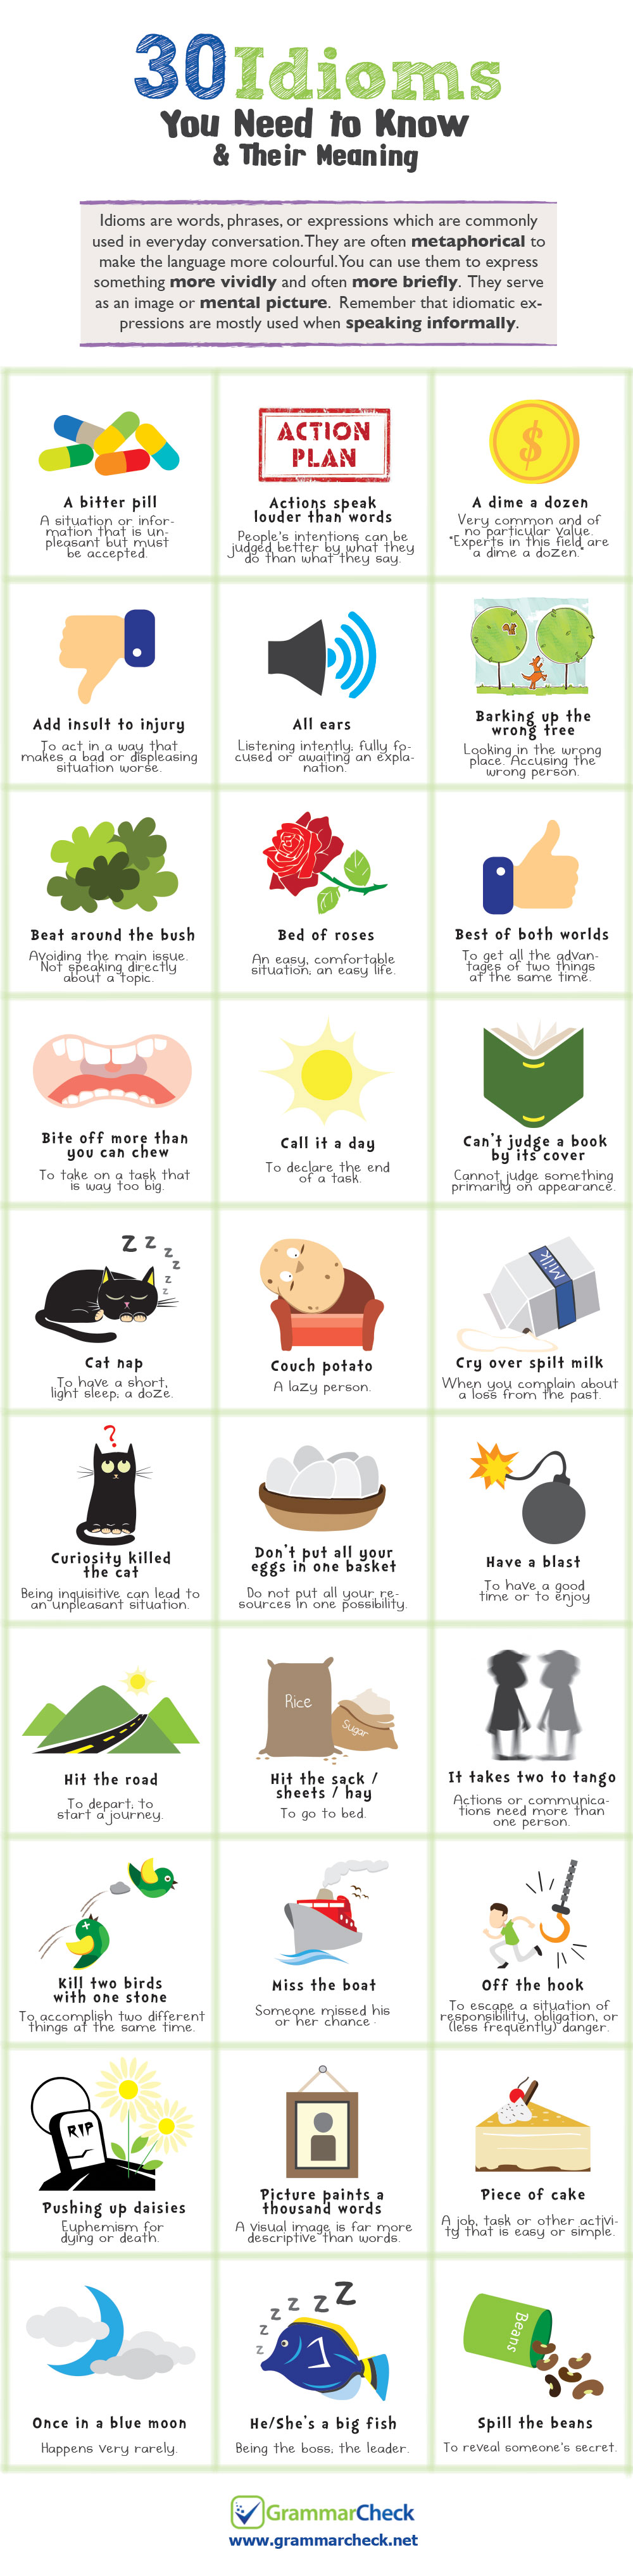 30 Idioms You Need to Know & Their Meaning (Infographic)